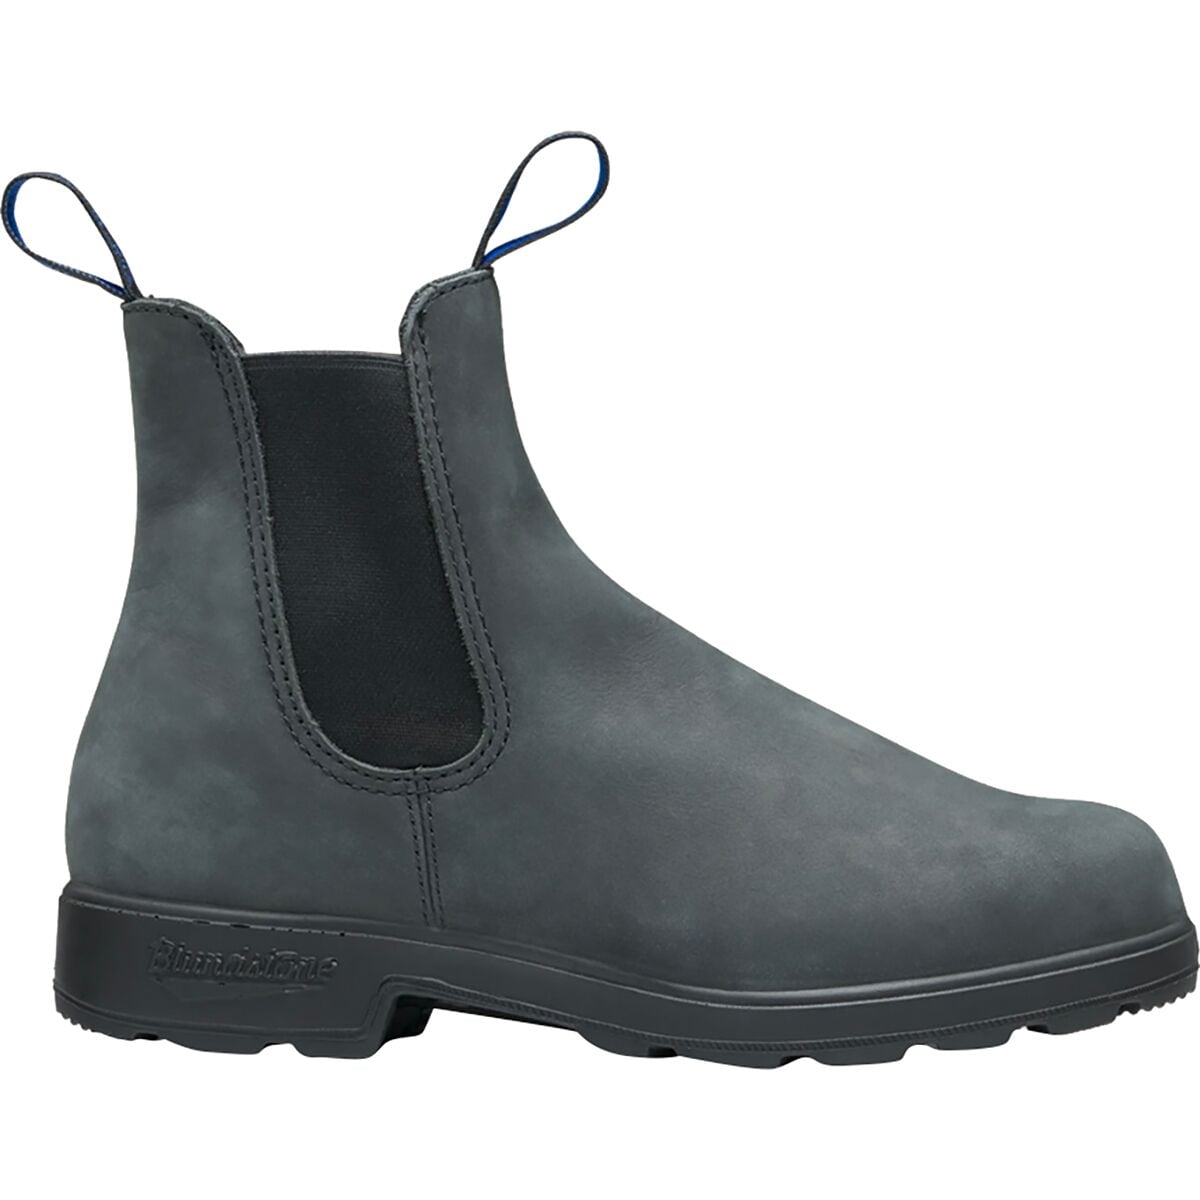 Blundstone Thermal High Top Boot - Women's